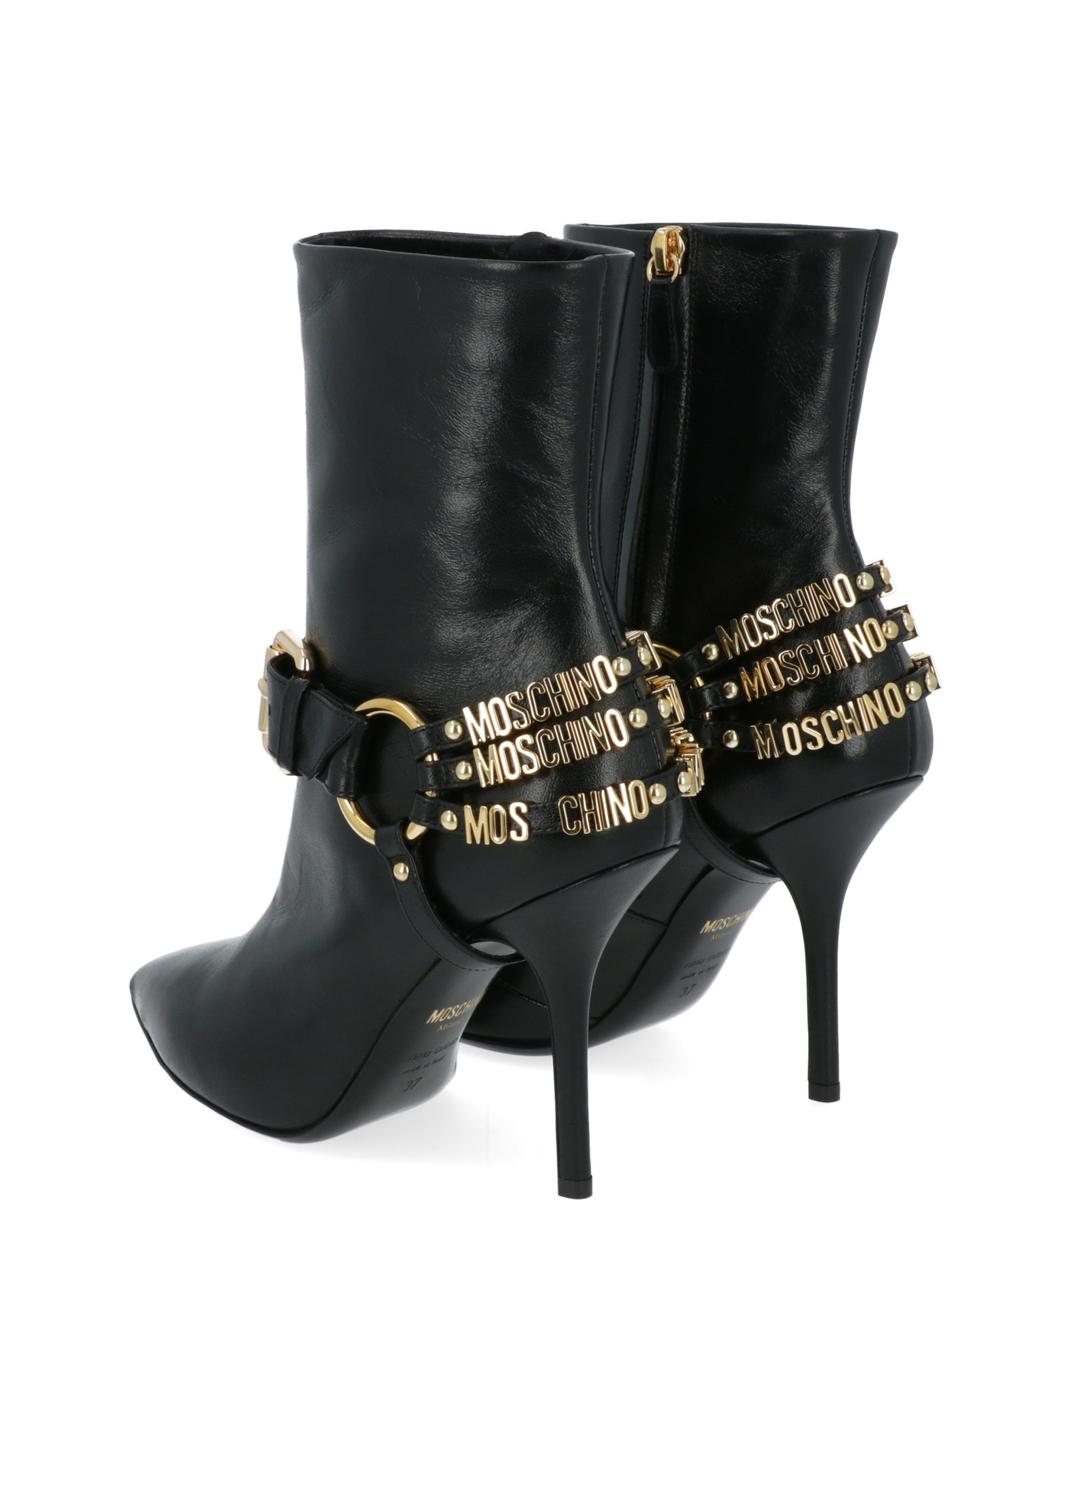 Moschino botines Mini Lettering MSC-MA2102A - LOUDER Lifestyle